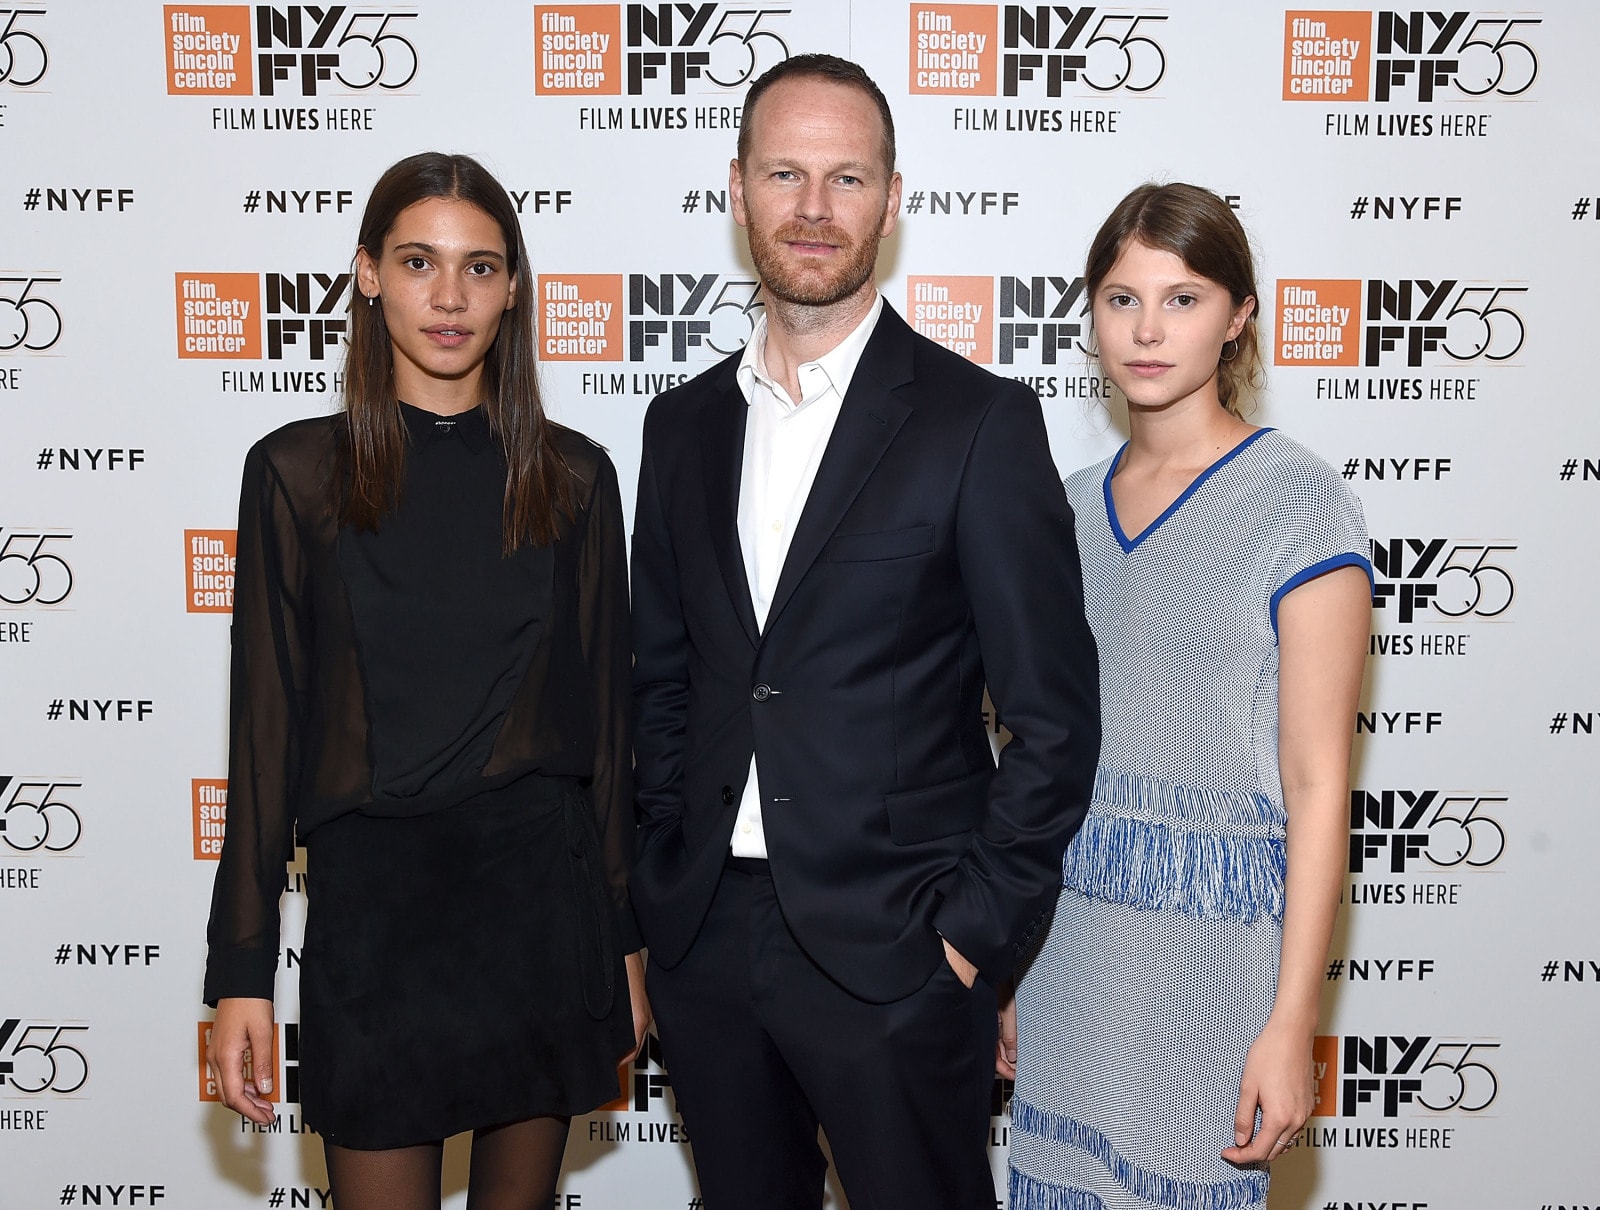 Thelma director and co-stars at the NY film festival